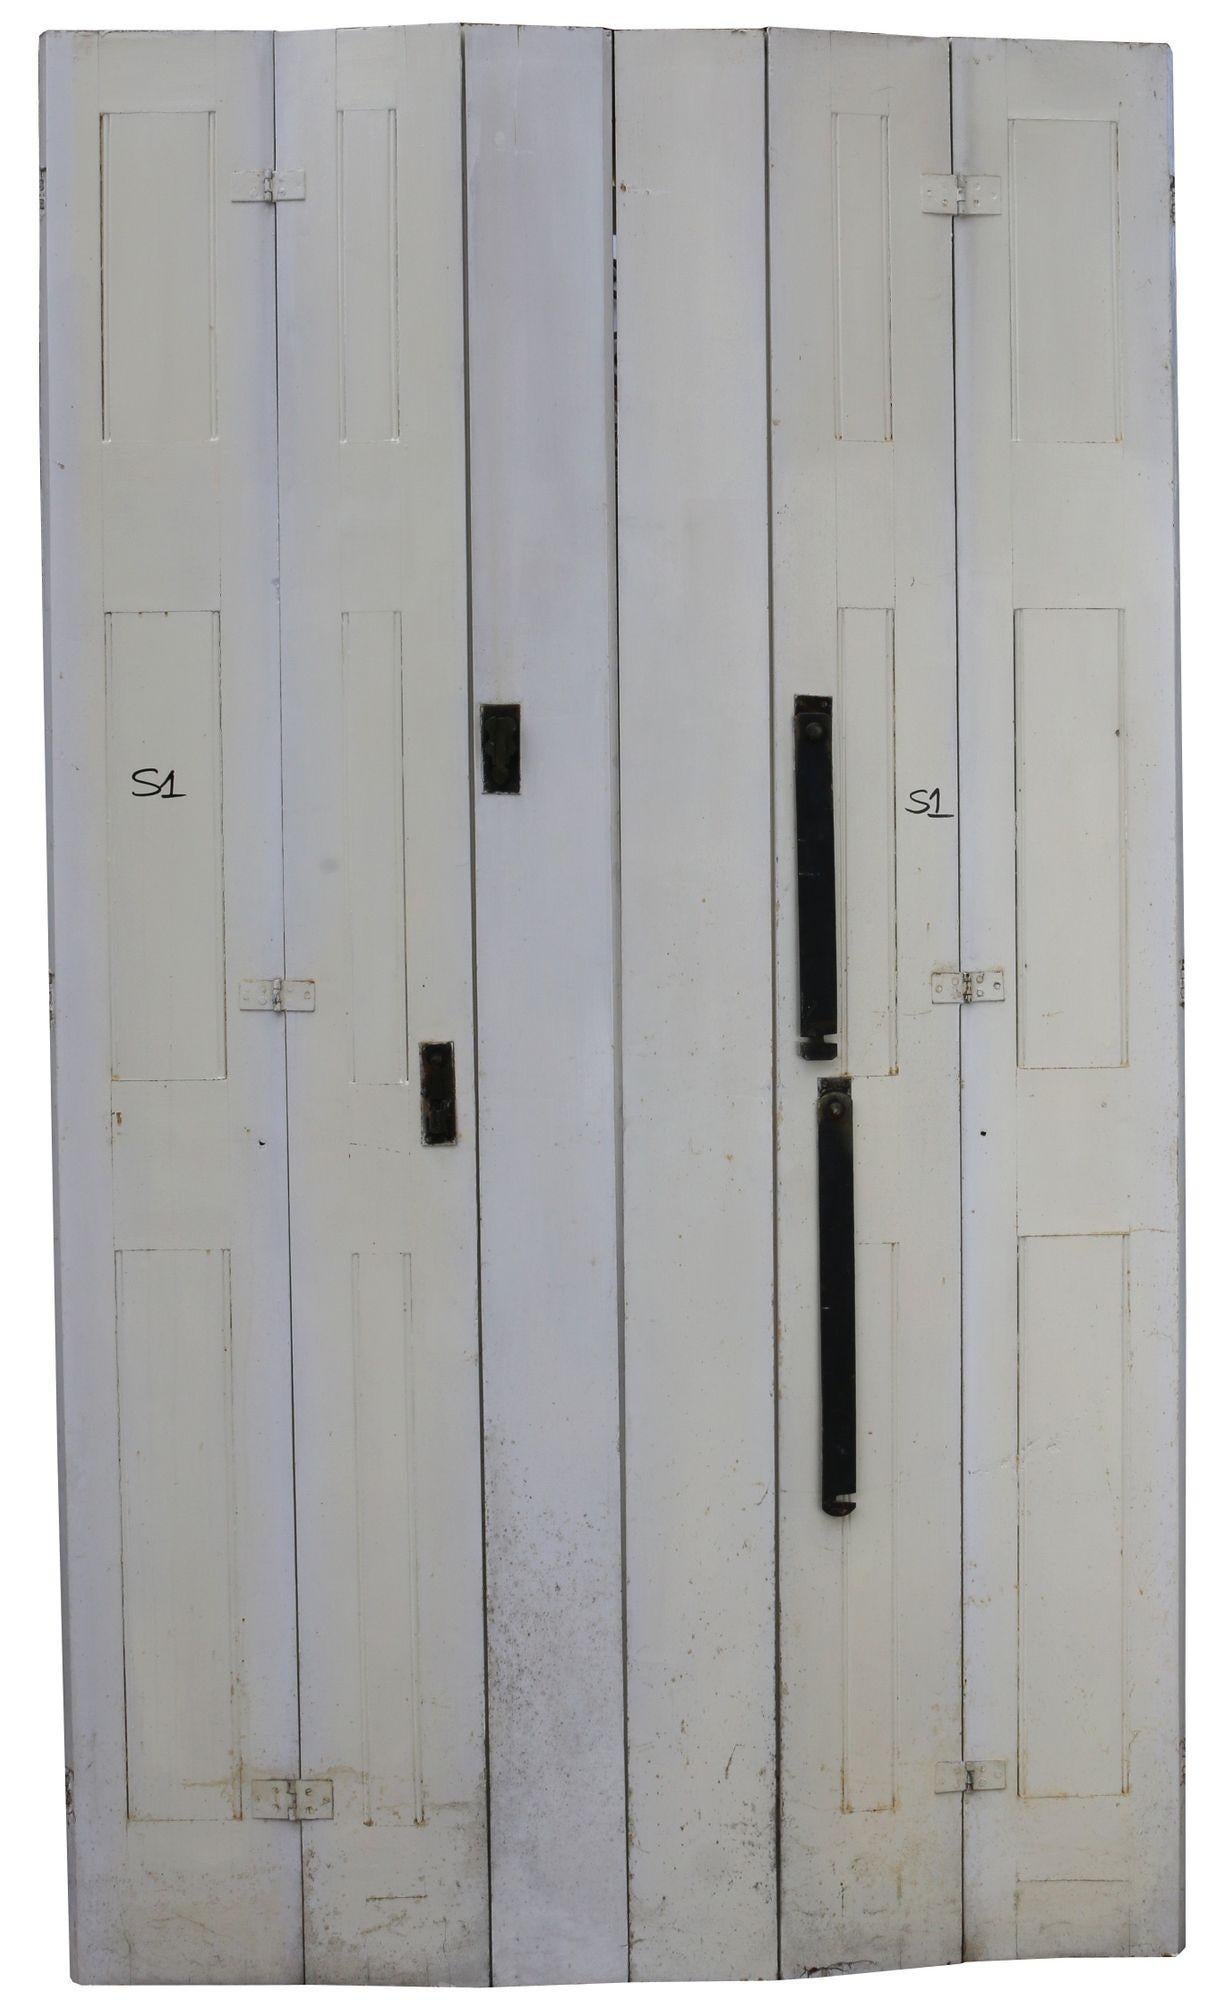 These shutters were salvaged from a large house in Esher, UK. We have similar sets available - please enquire for details.